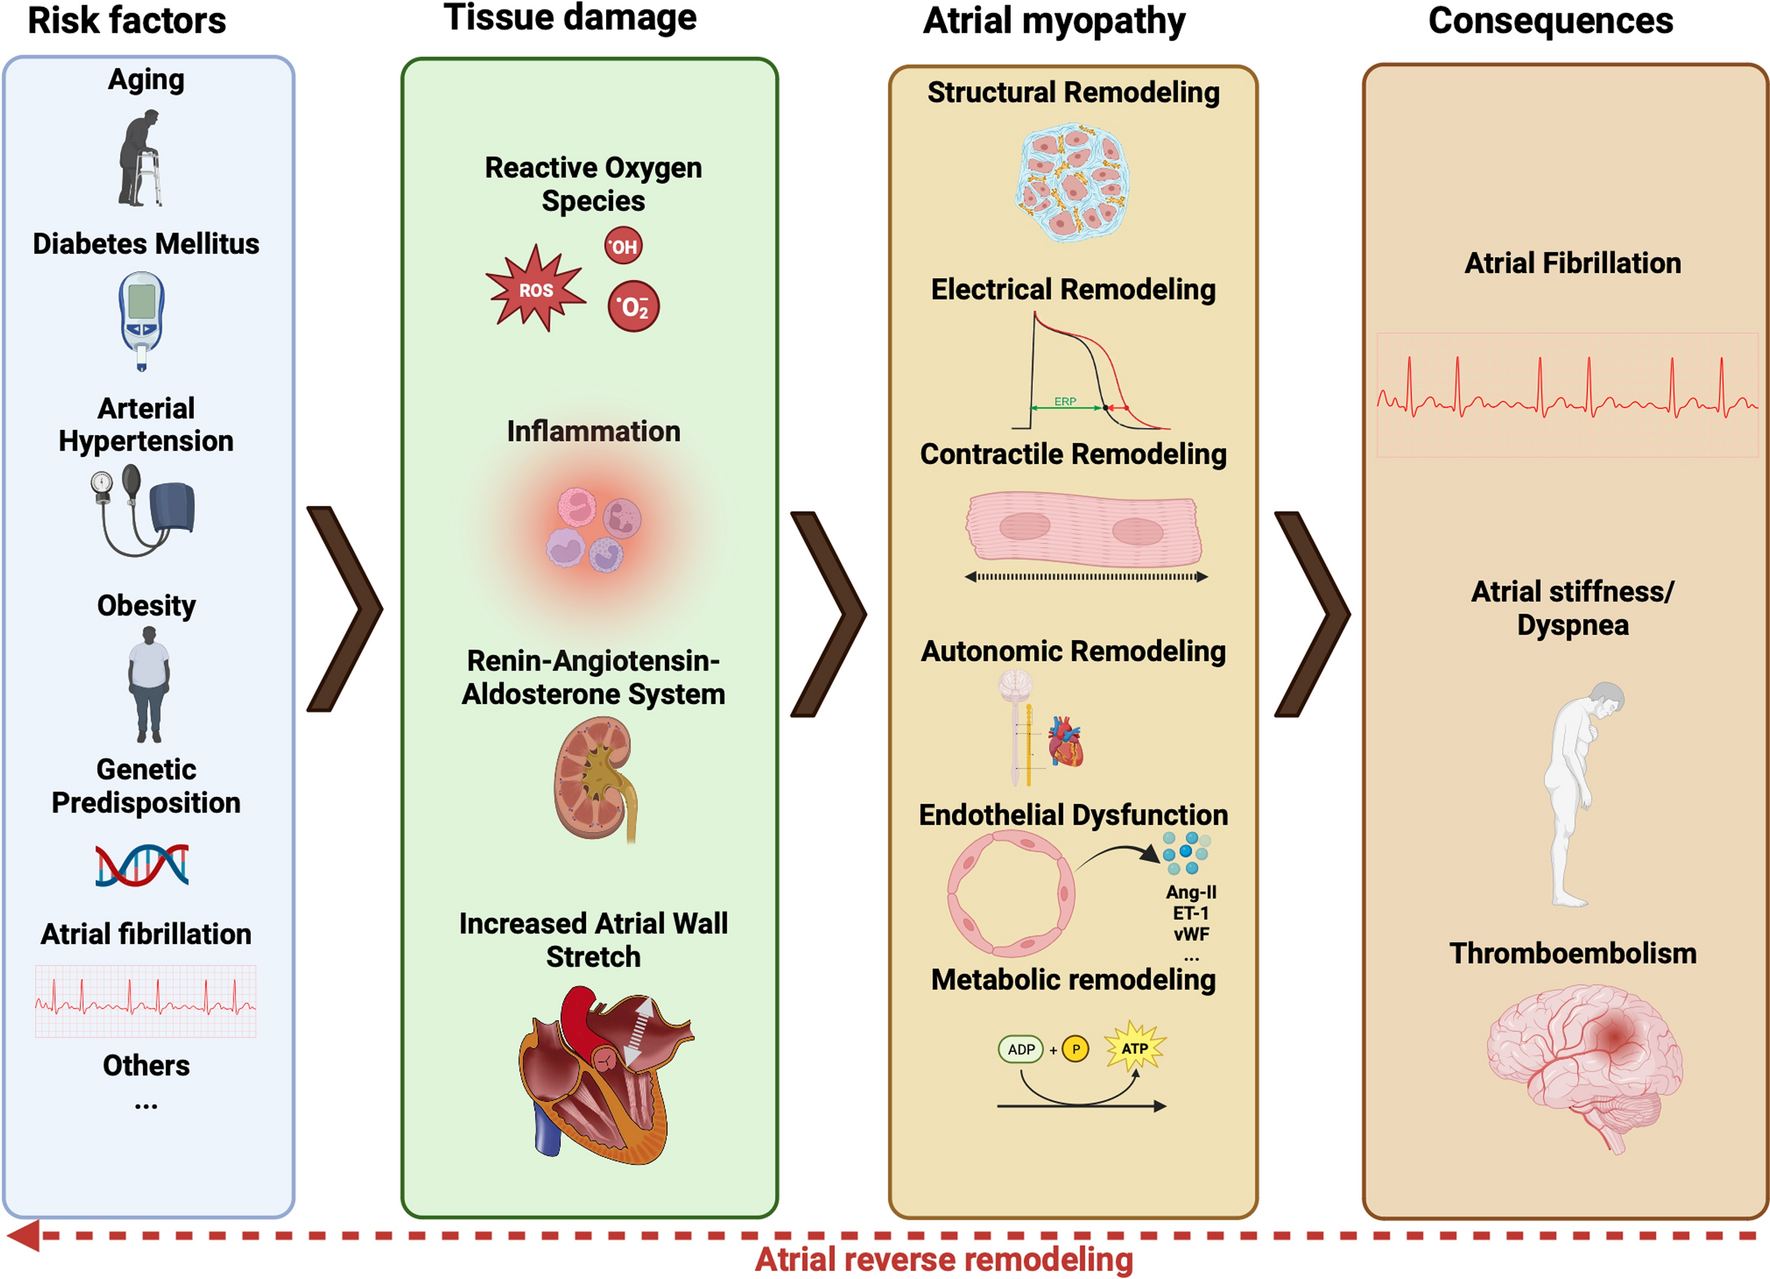 Pathophysiology and clinical relevance of atrial myopathy